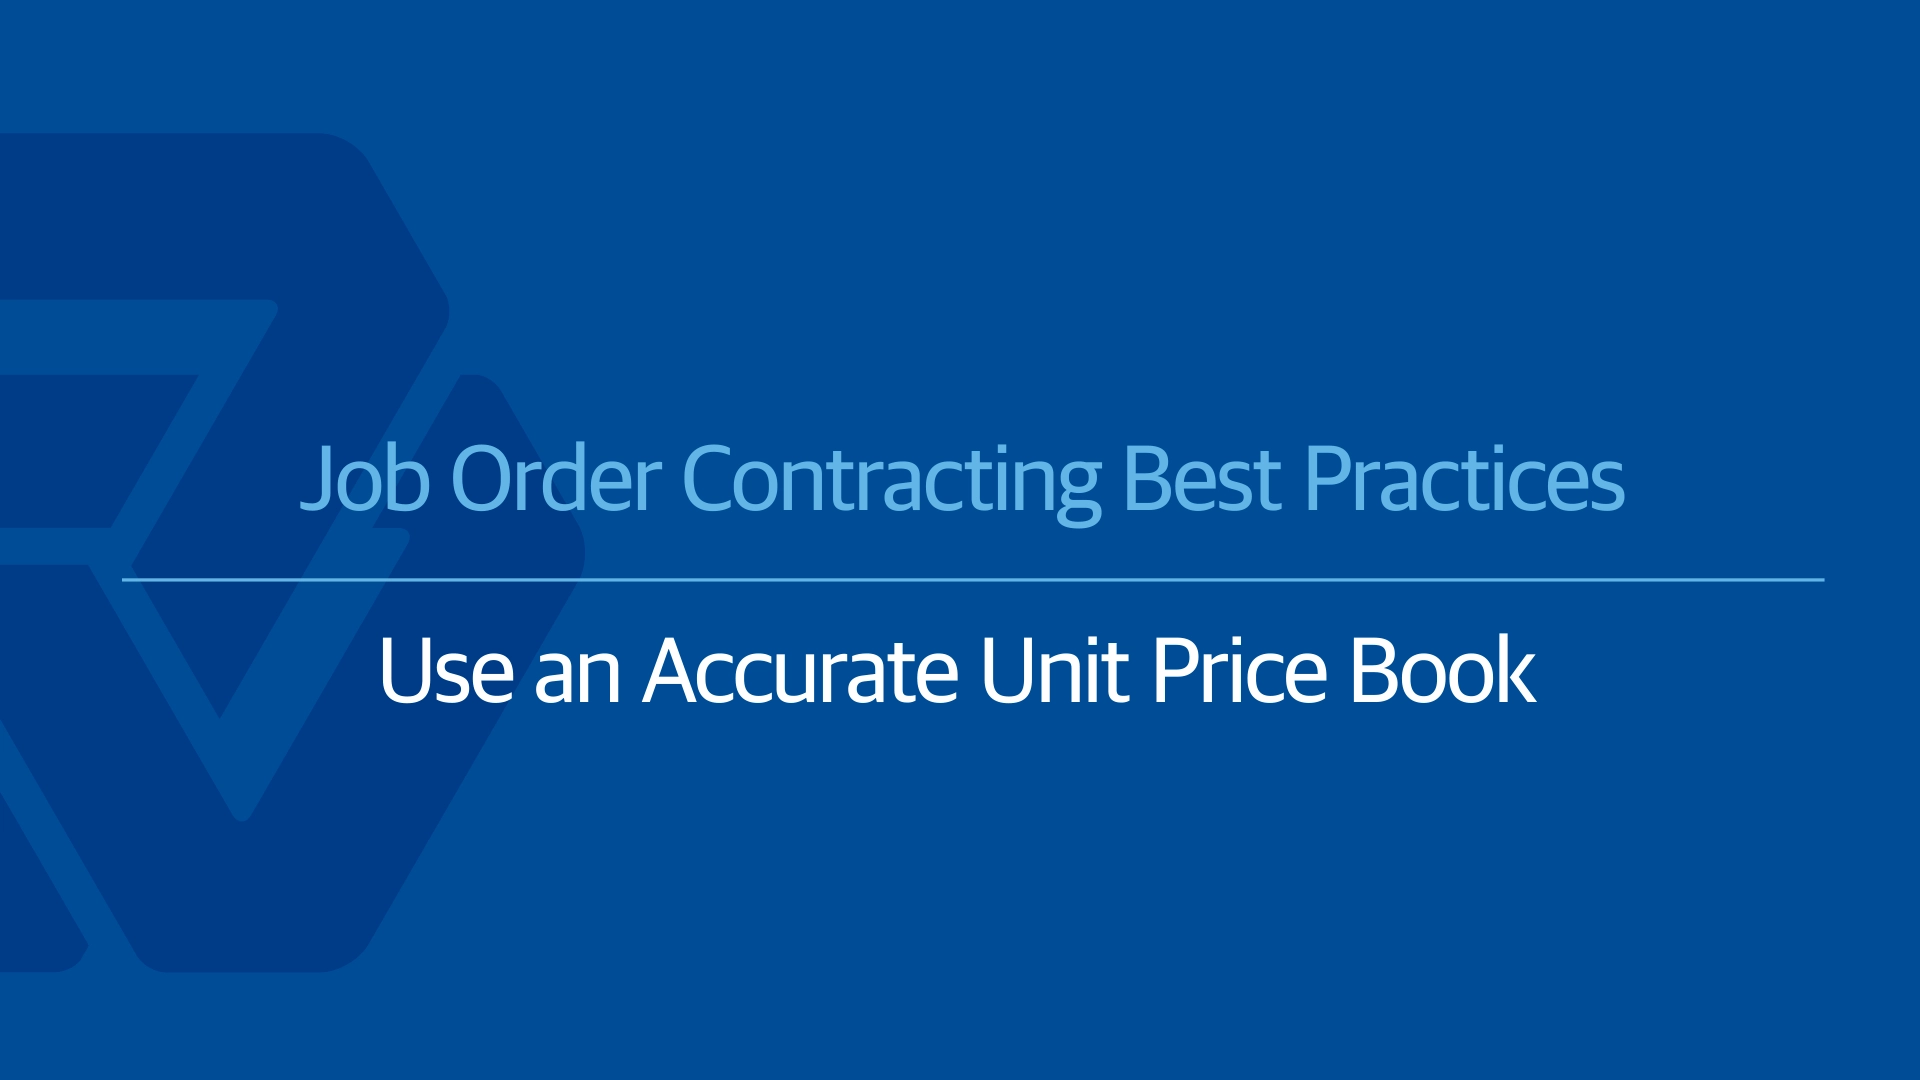 Job Order Contracting Best Practices: The Unit Price Book 2